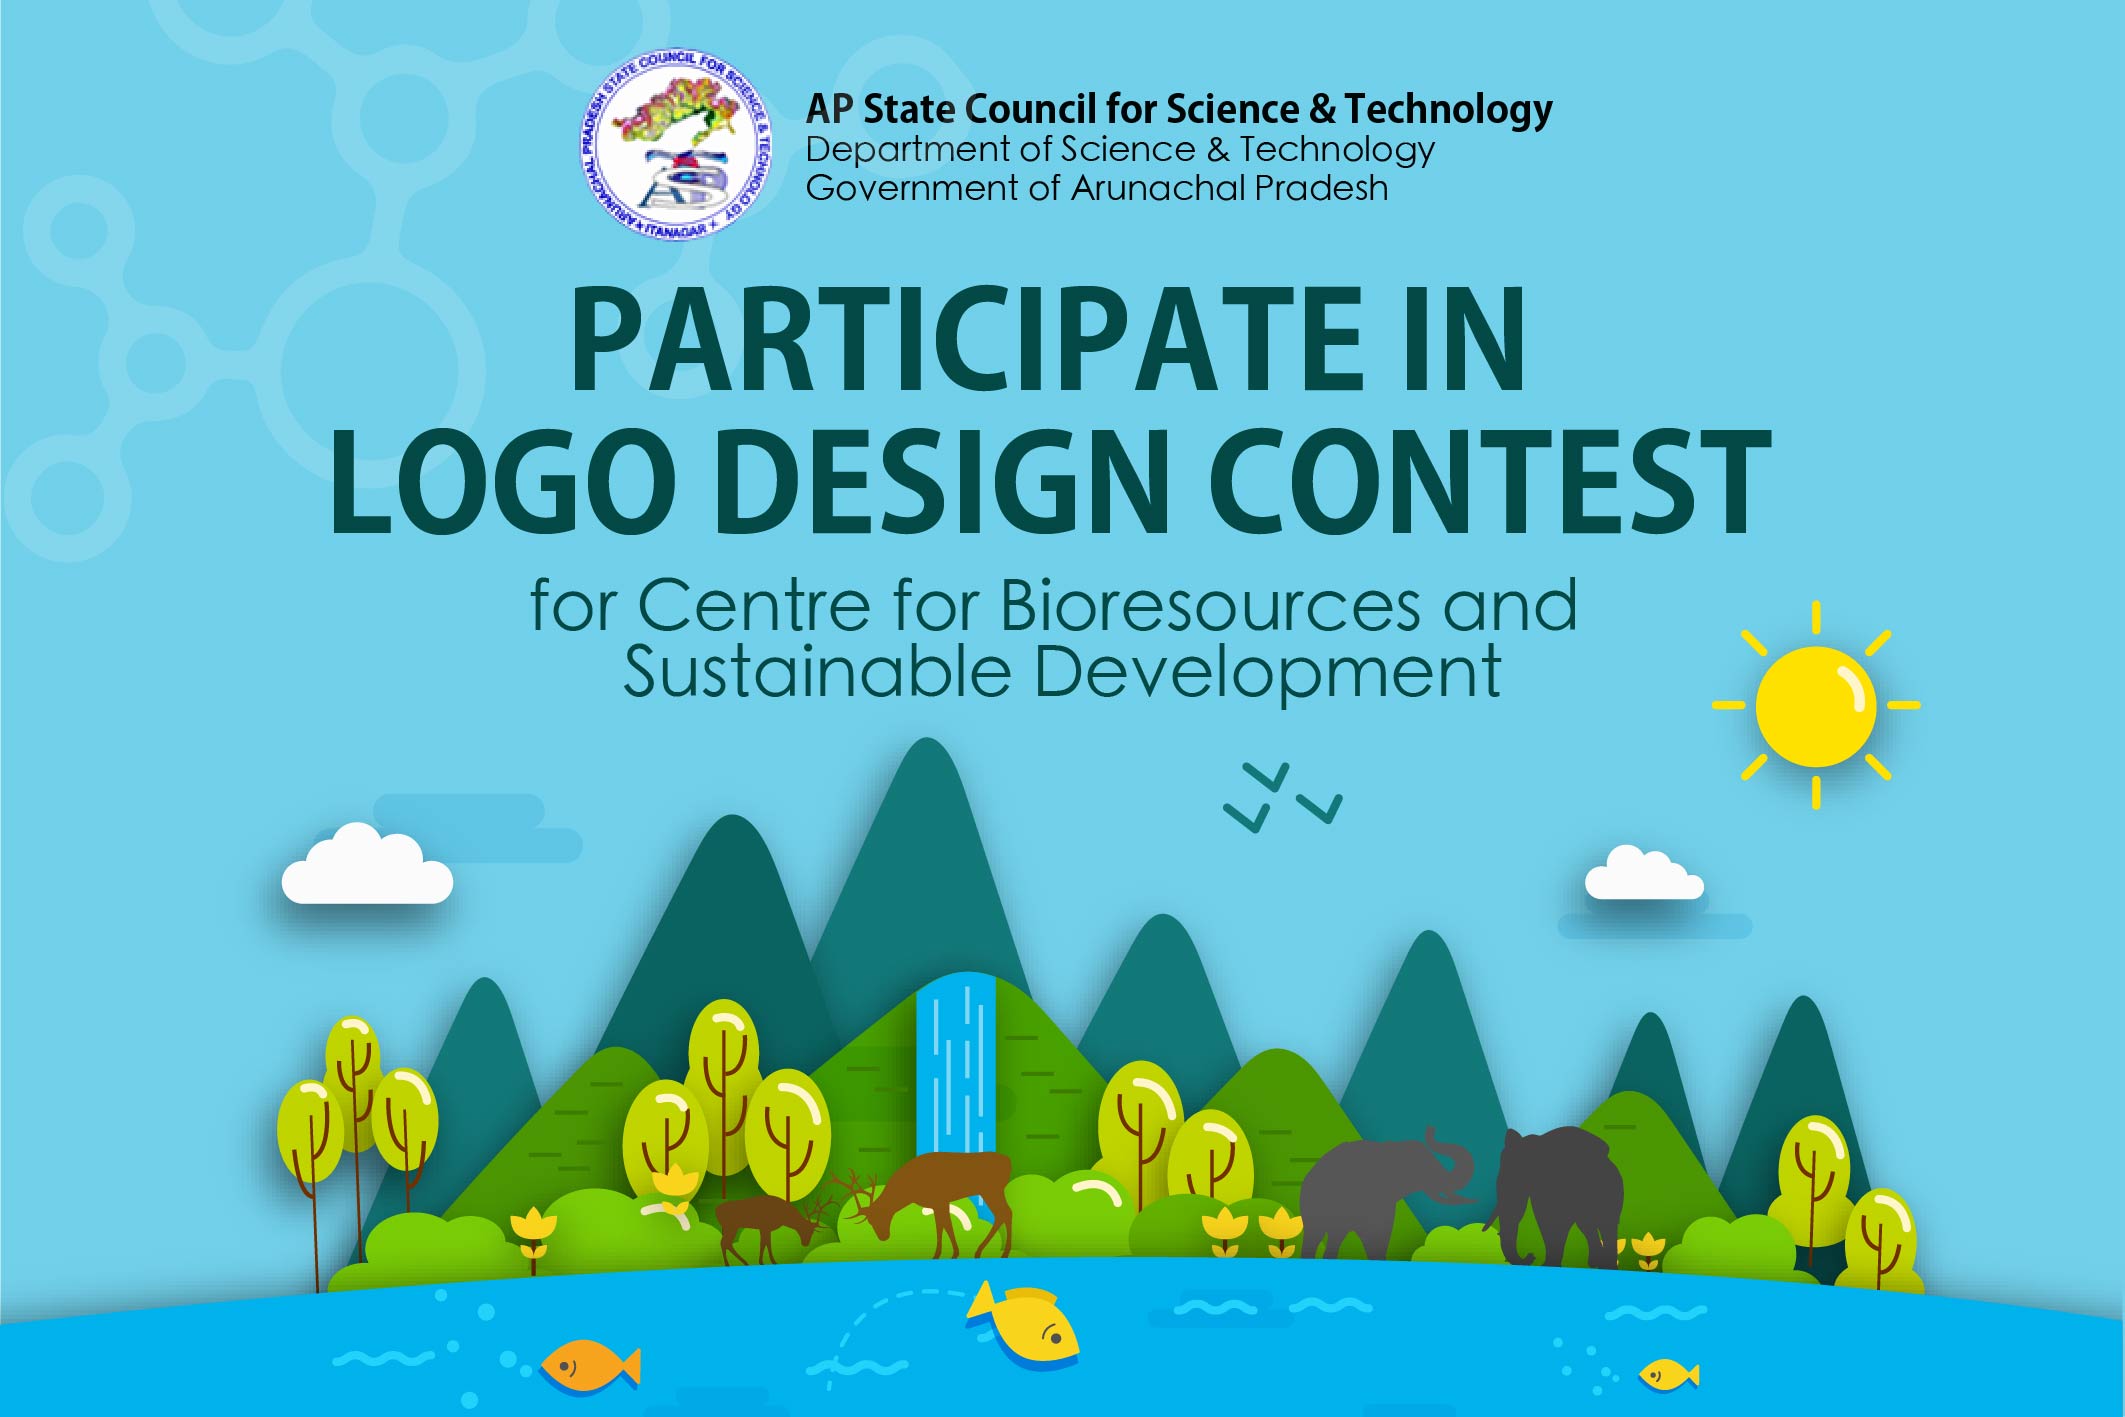 Logo Designing Contest for the Centre for Bioresources and Sustainable Development